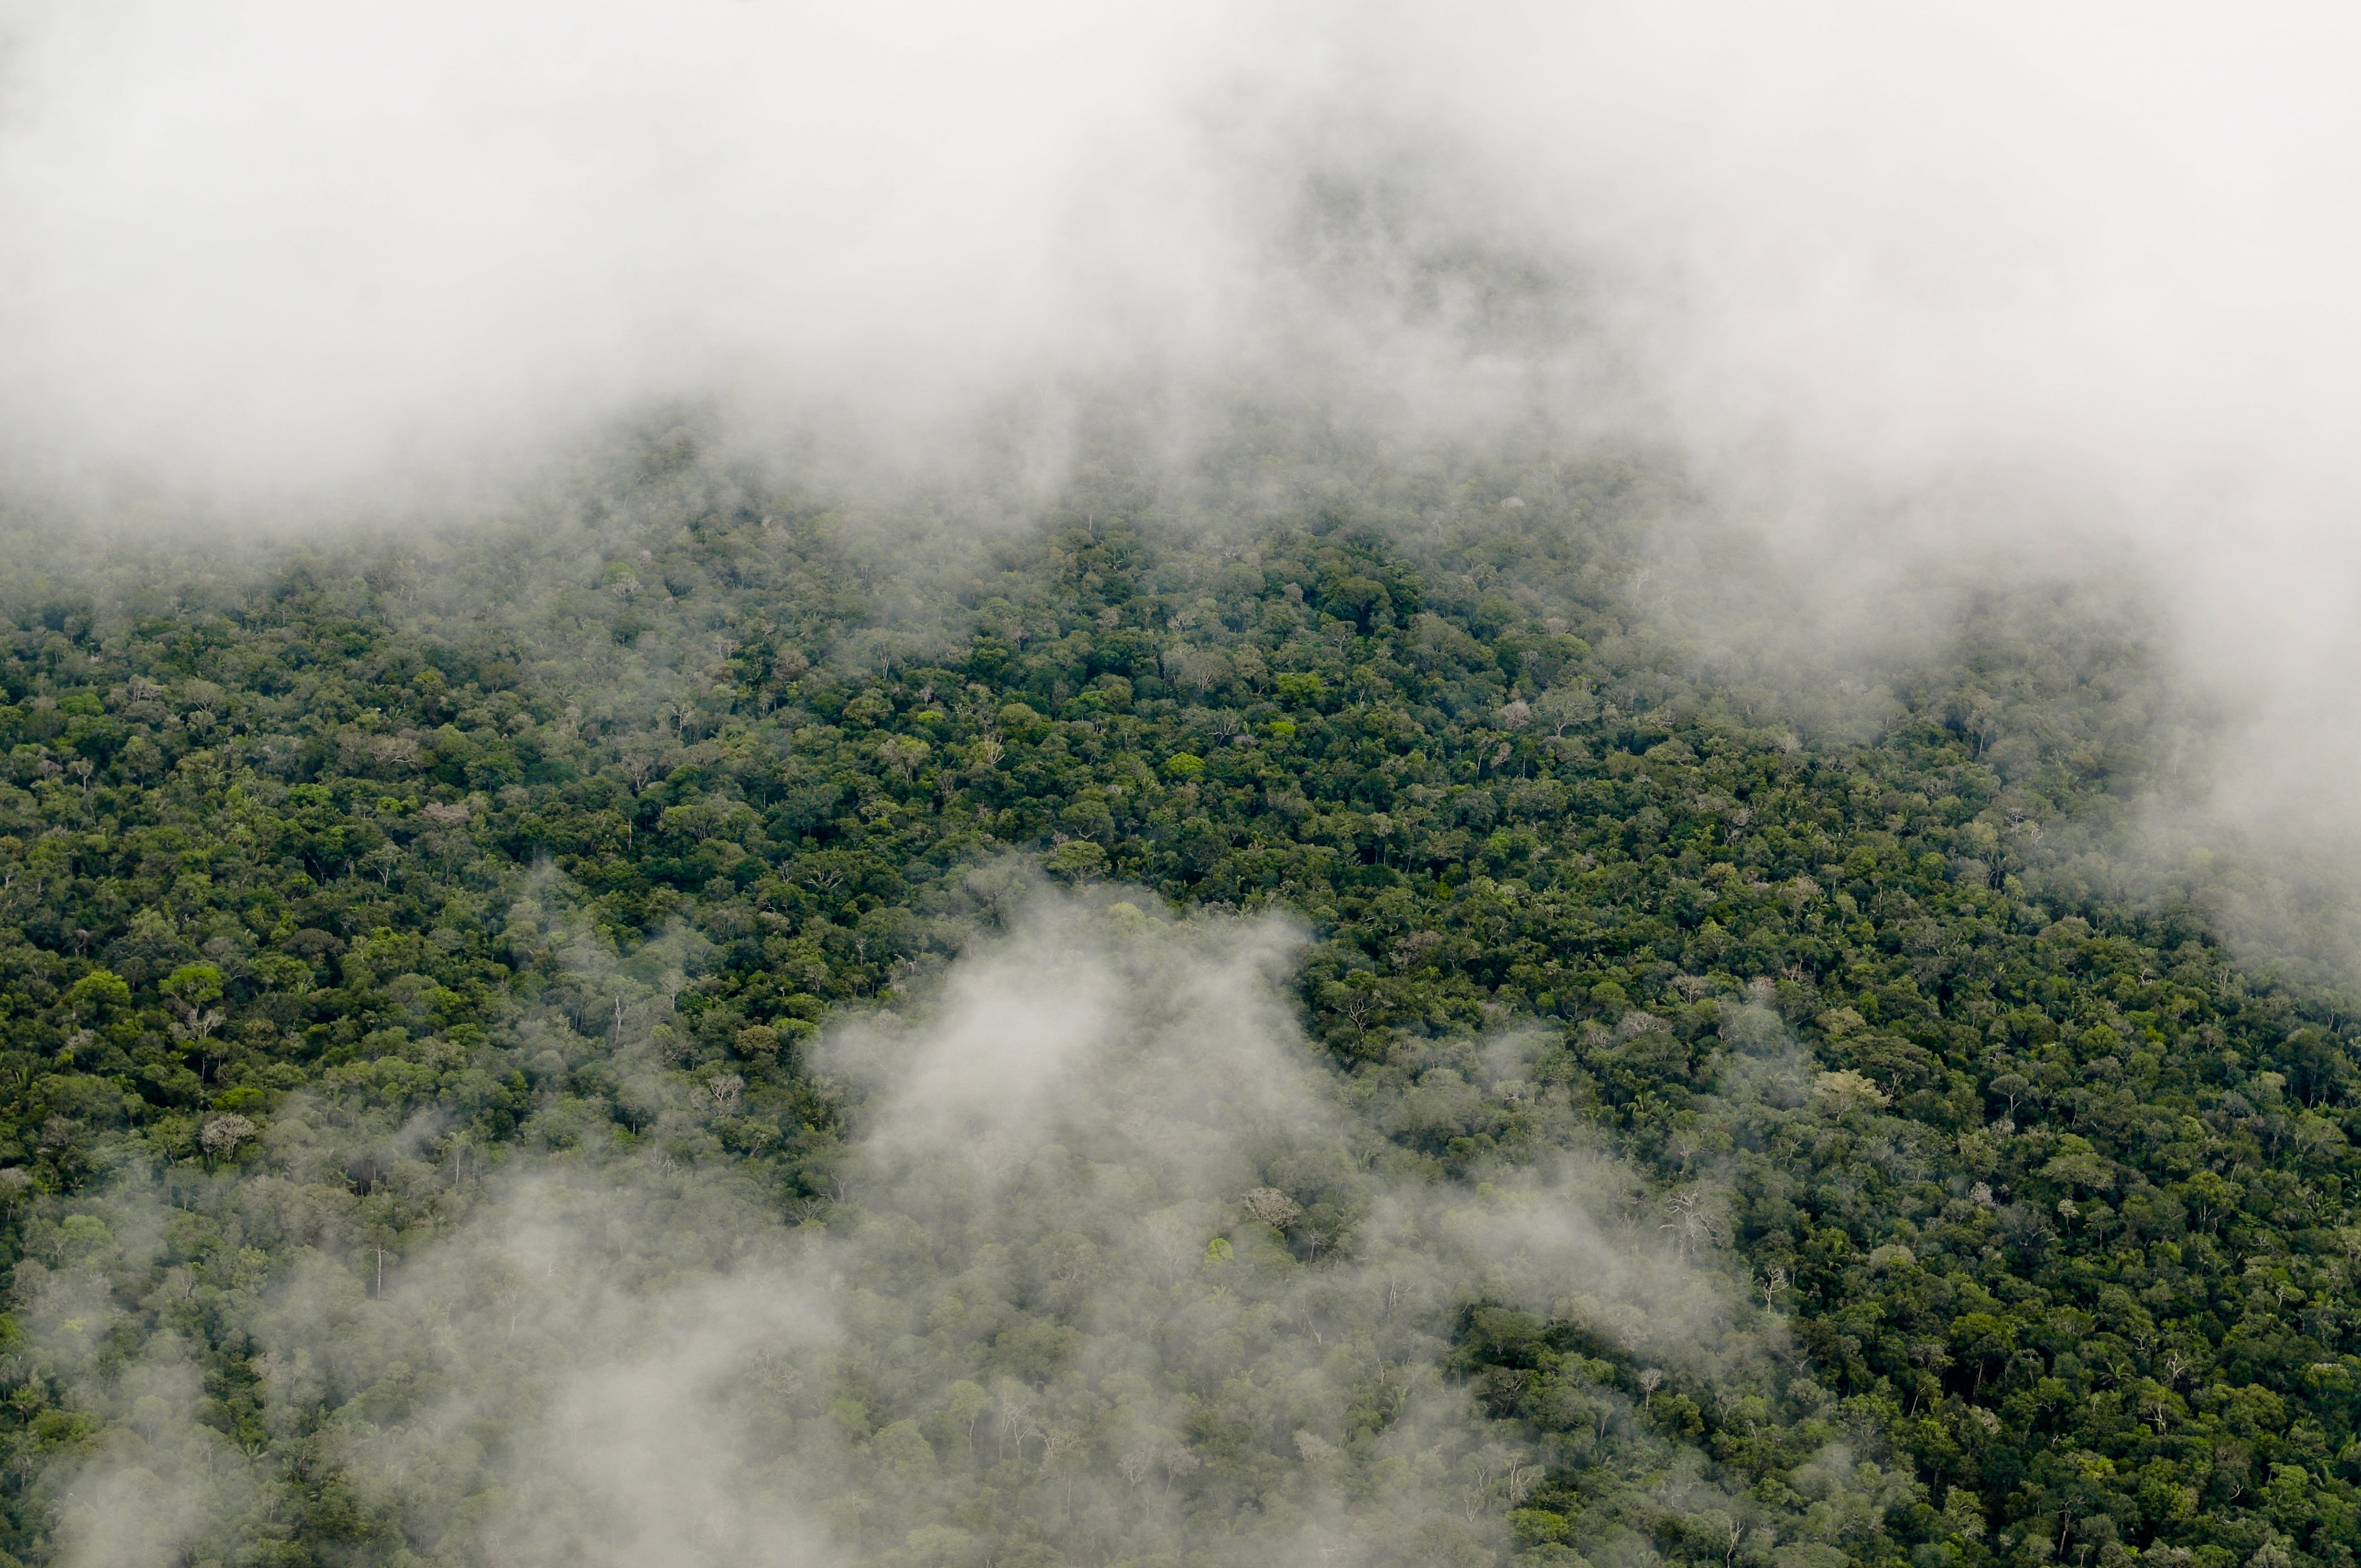 Clouds gathering above the treetops of the Amazon Rainforest.